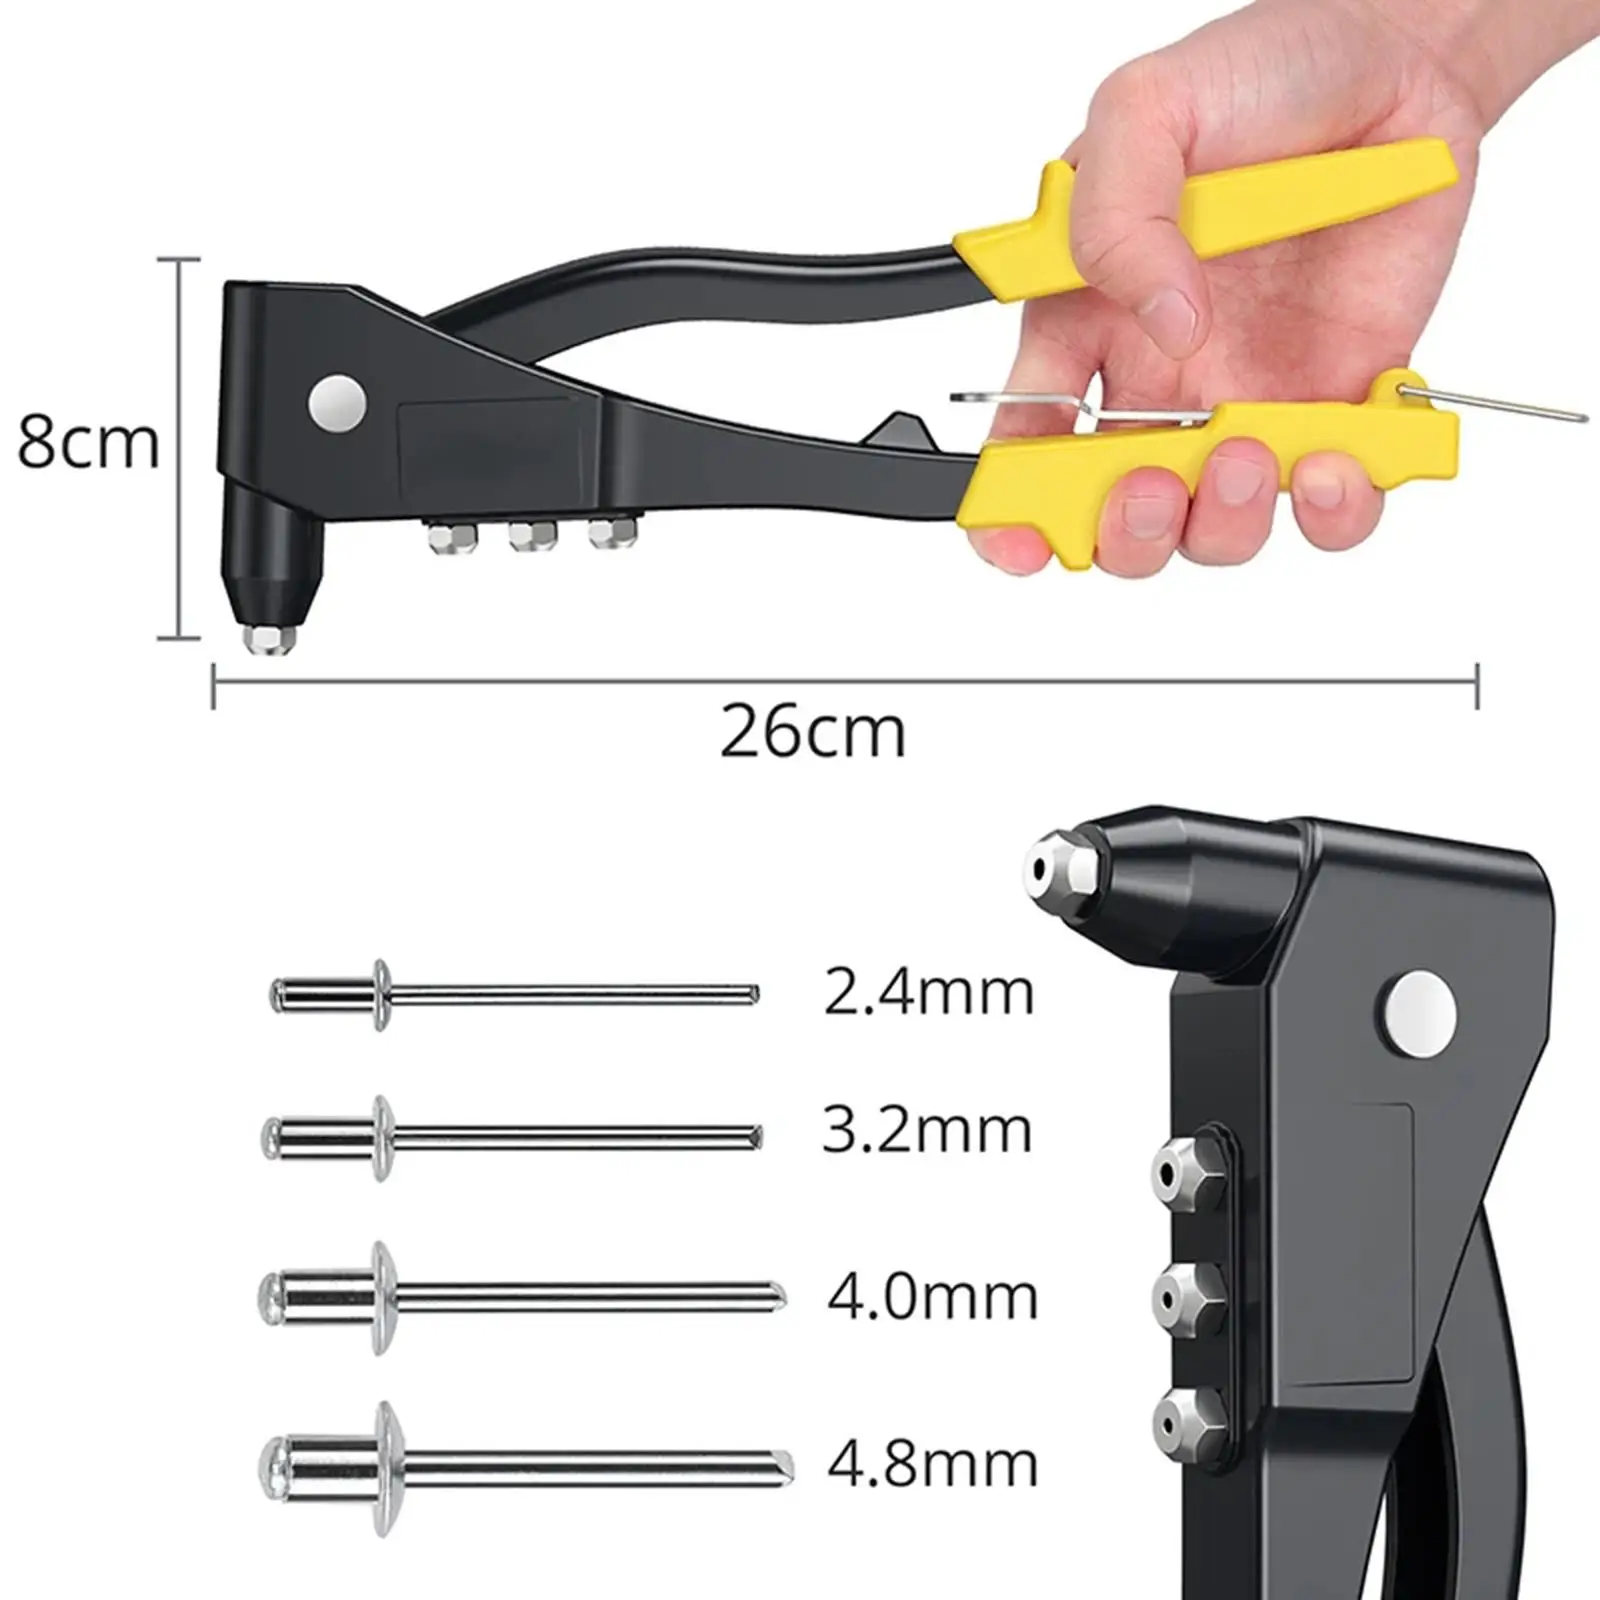 Hand Riveter Kit Heavy Duty Professional Sturdy Efficient Easy to Use Rivet Tool for Railway Duct Work Automotive Leather Metal